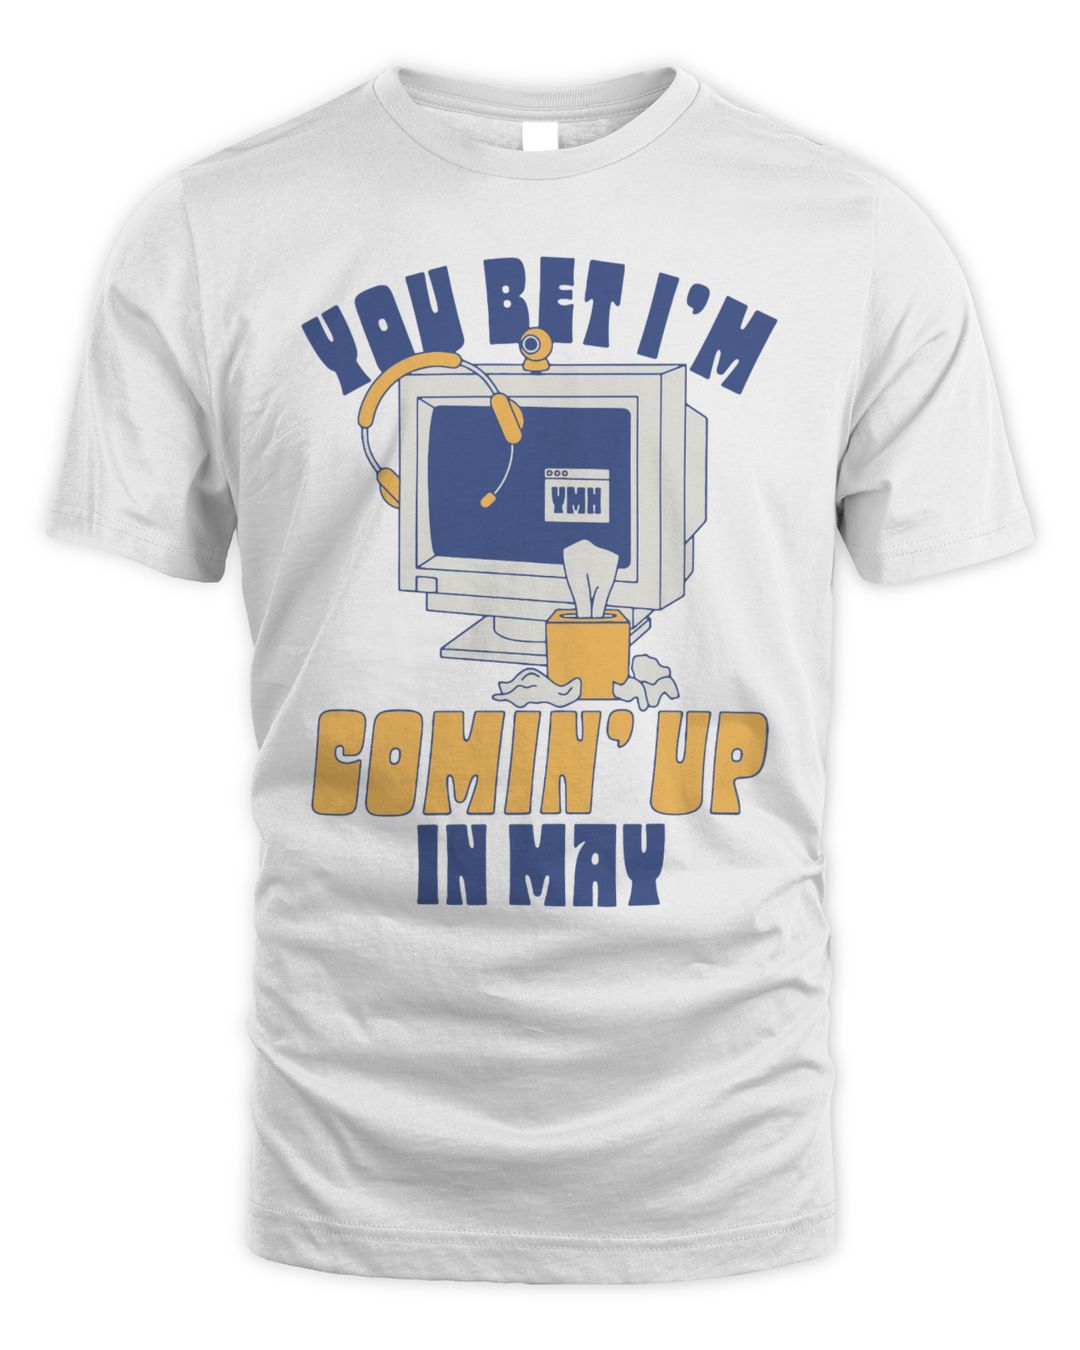 Ymh Merch You Bet I’m Comin’ Up in May Shirt